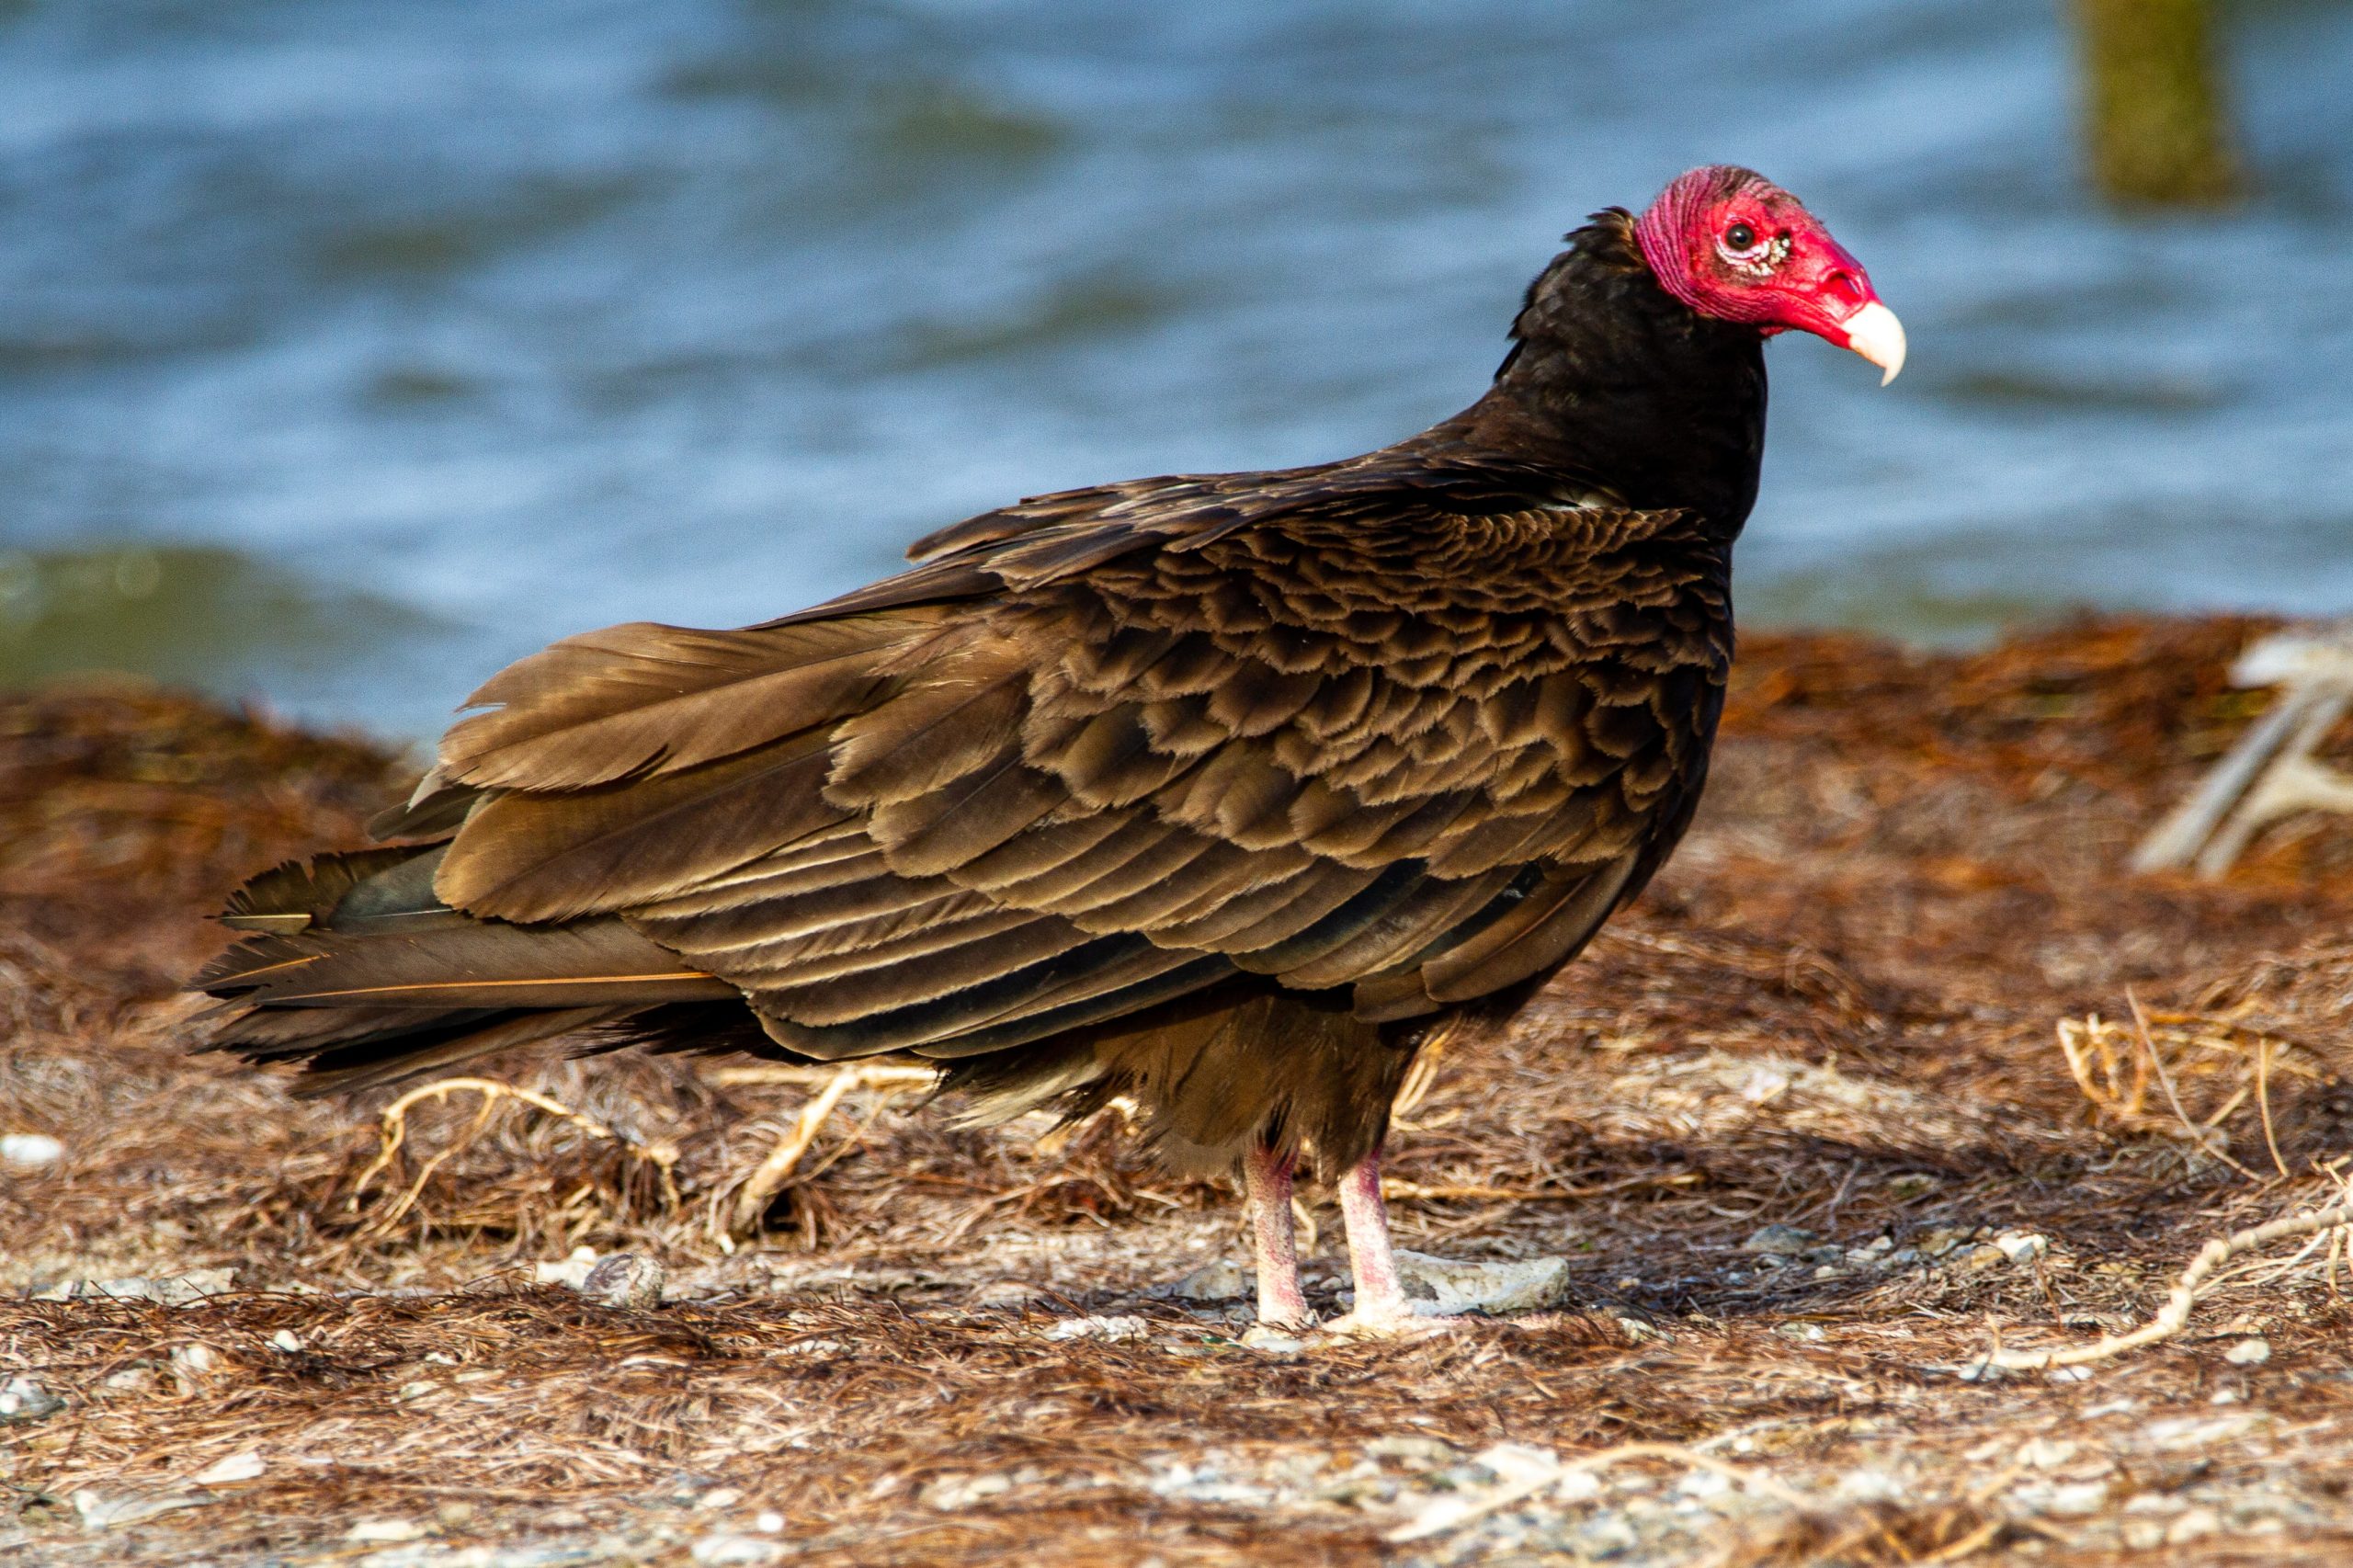 Turkey Vultures Have a Keen Sense of Smell and Now We Know Why